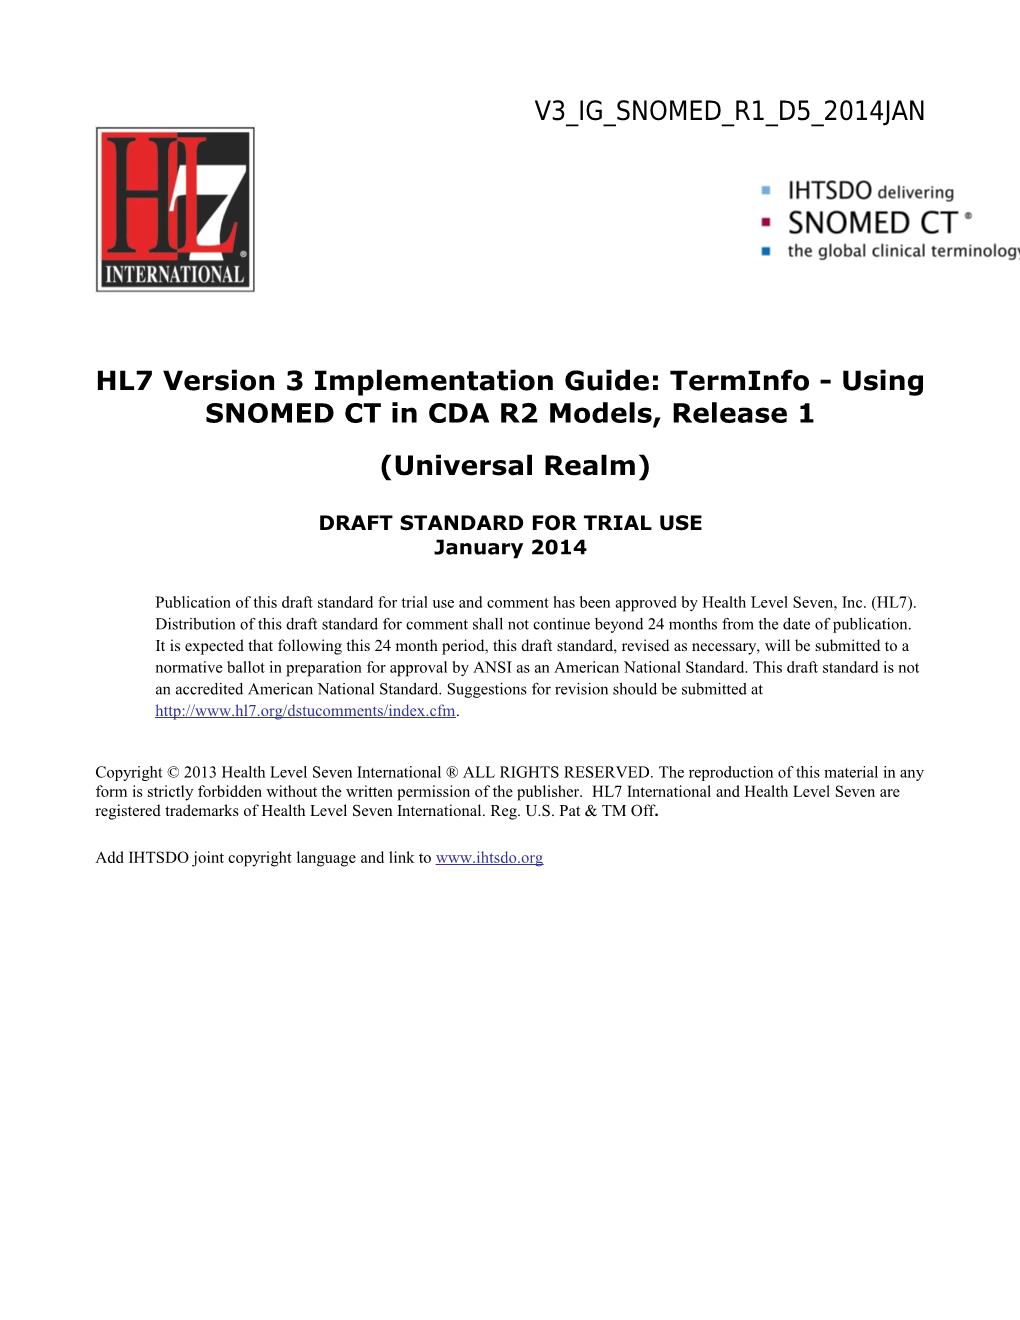 HL7 Version 3 Implementation Guide: Terminfo - Using SNOMED CT in CDA R2 Models, Release 1